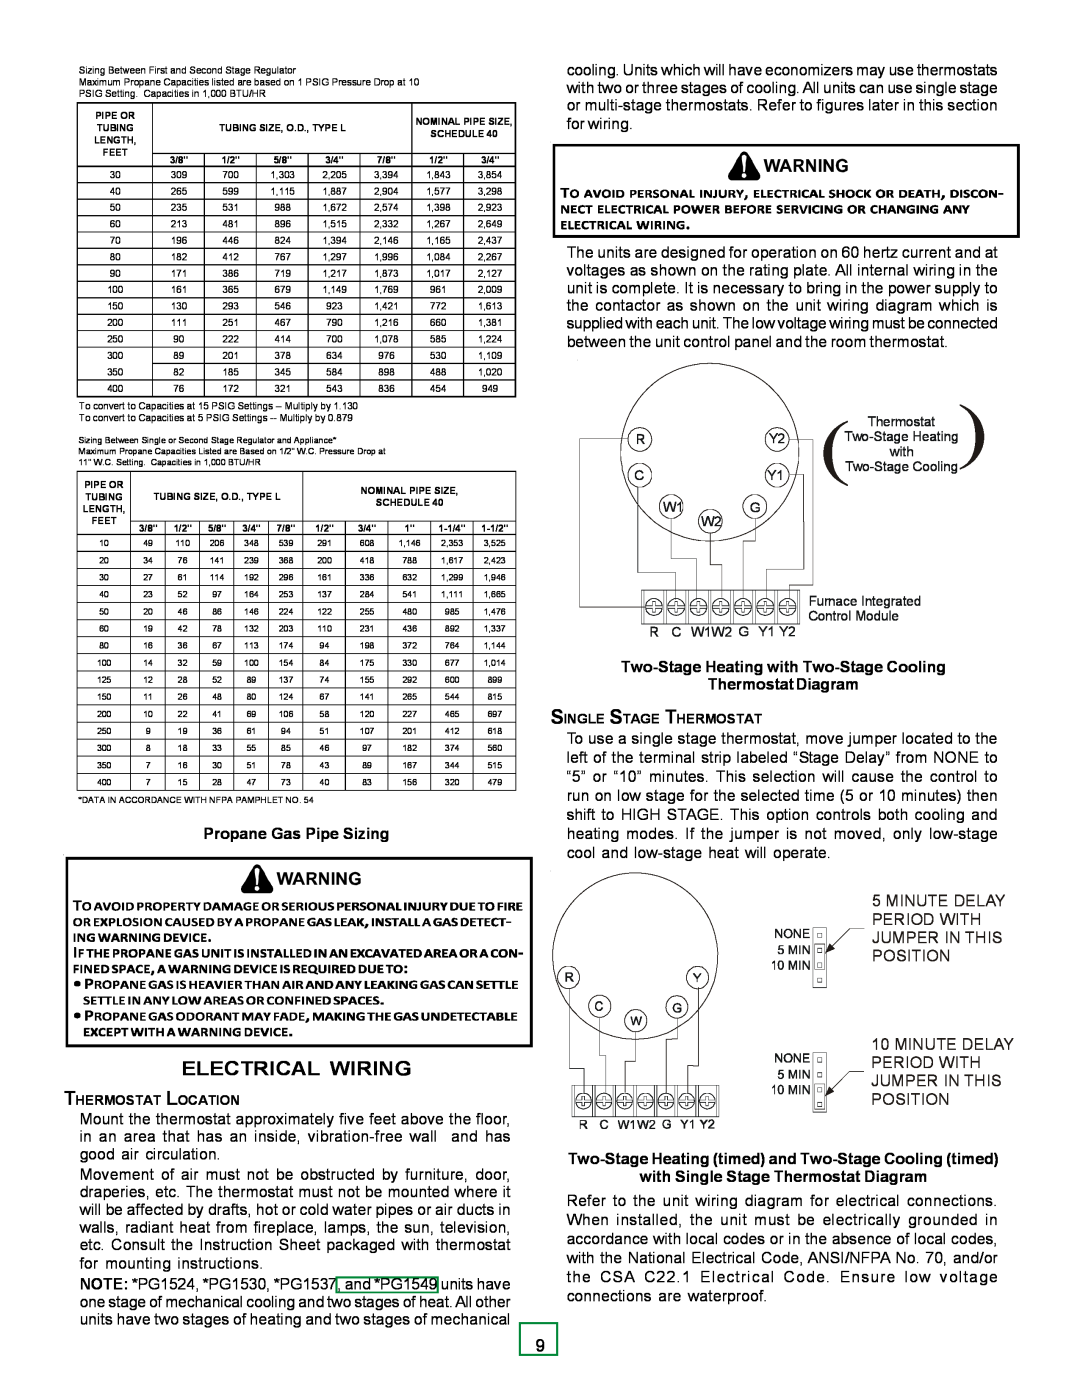 Goodman Mfg PG 15 specifications Propane Gas Pipe Sizing, Two-StageHeating with Two-StageCooling, Thermostat Diagram 